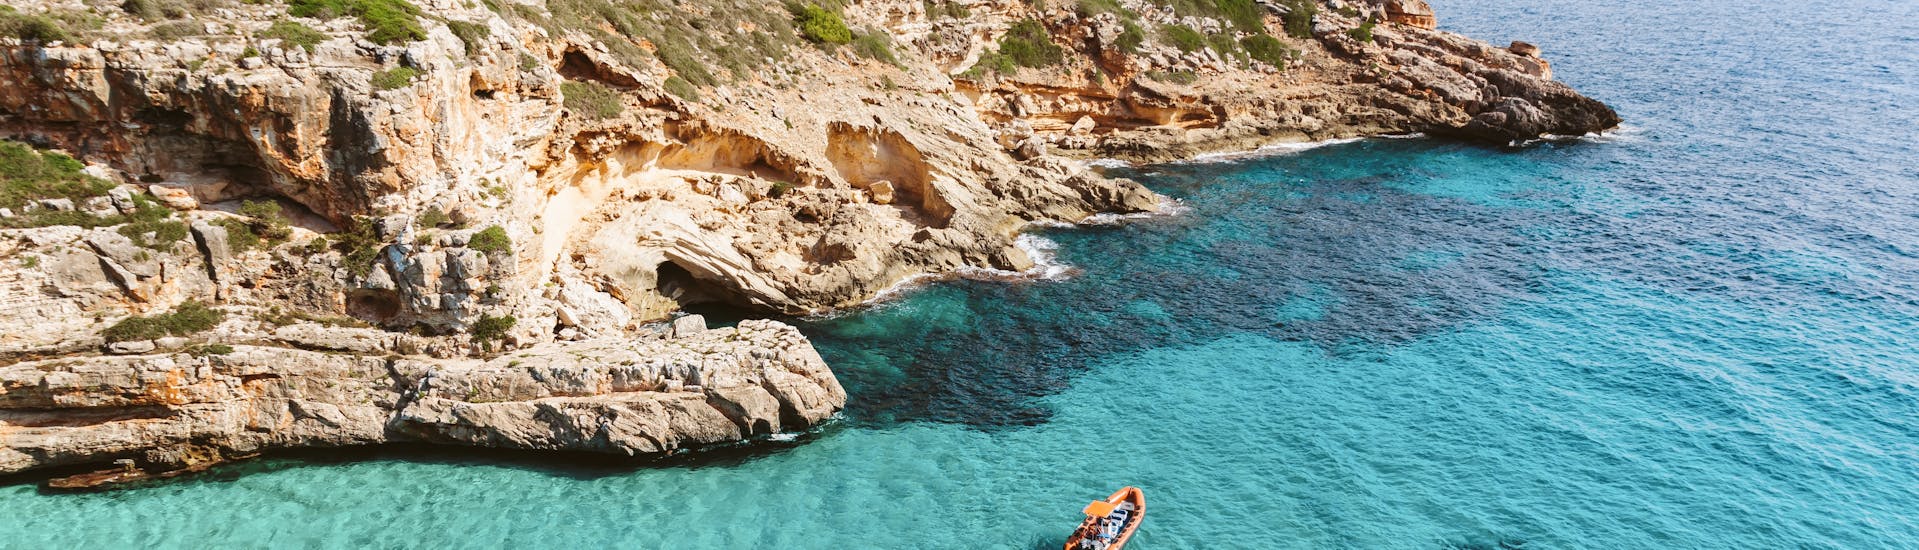 Boat Rental in blue and beautiful Cala Figuera (up to 4 people) without license with Redstar Tours